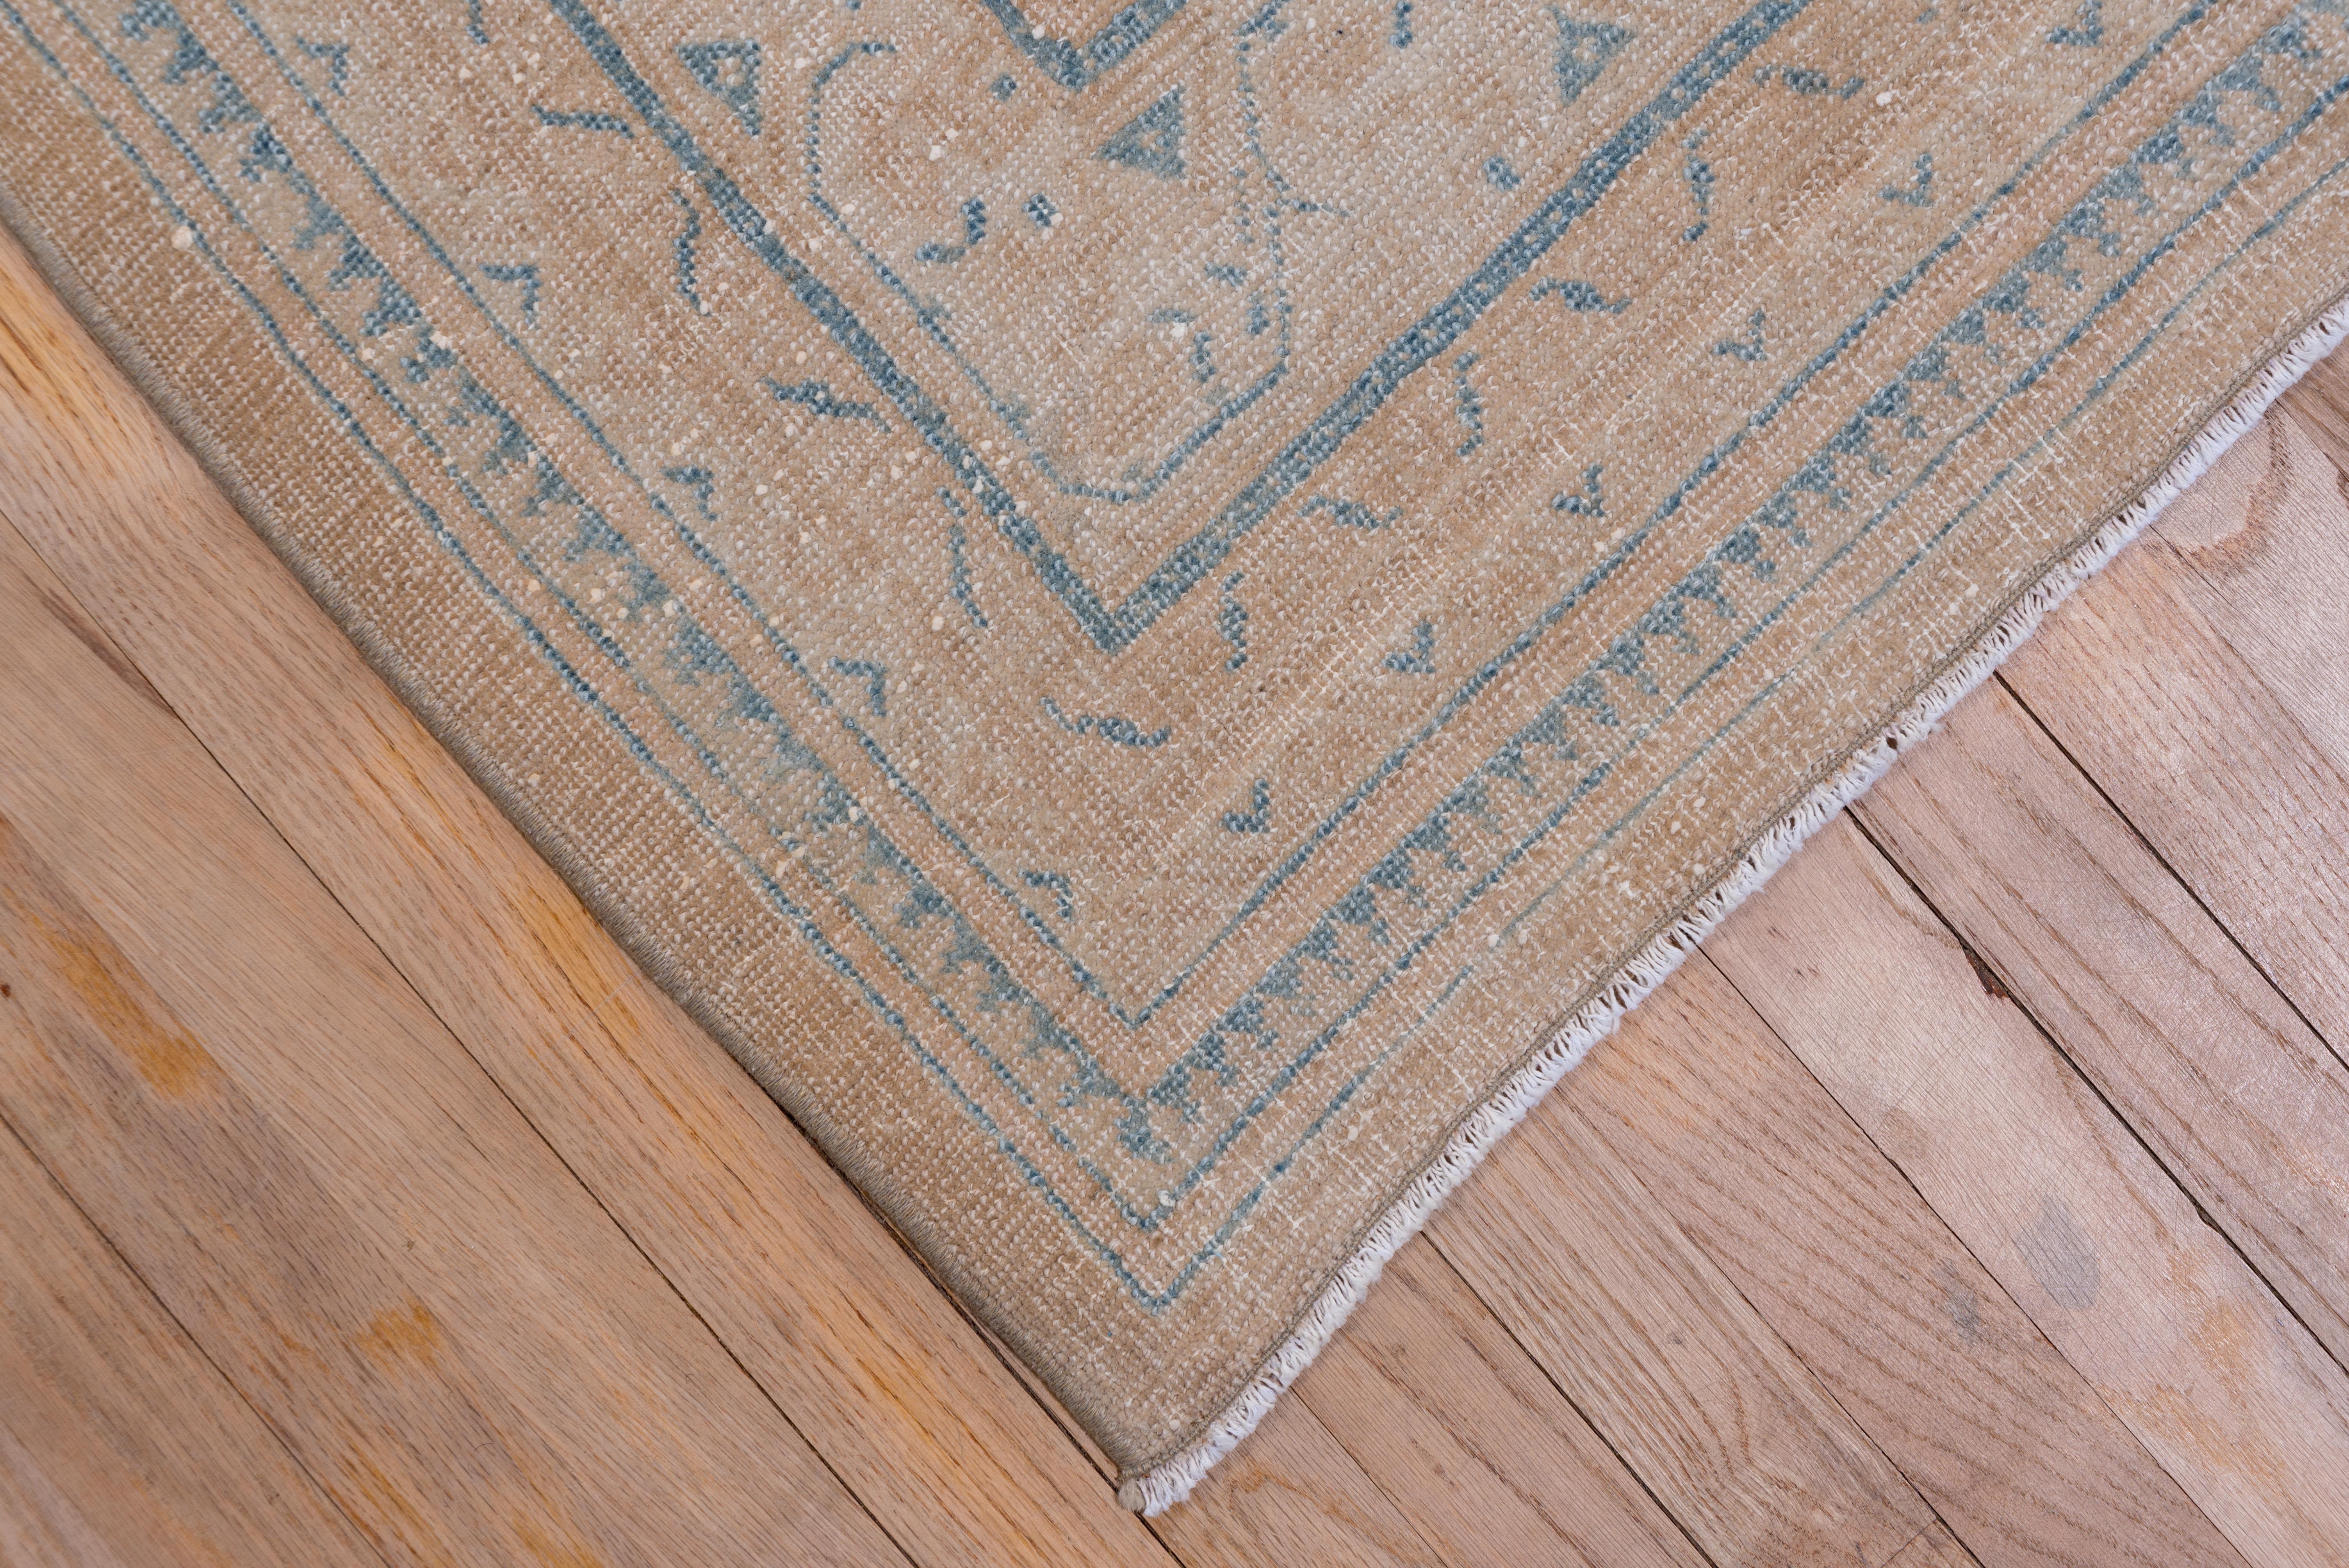 Could be a very light Saraband instead of a Mahal. Still west Persian, however. The very soft, overall beige and sand palette features rows and rows of little offset floriated botehs while the multiple border system shows the main stripe in straw